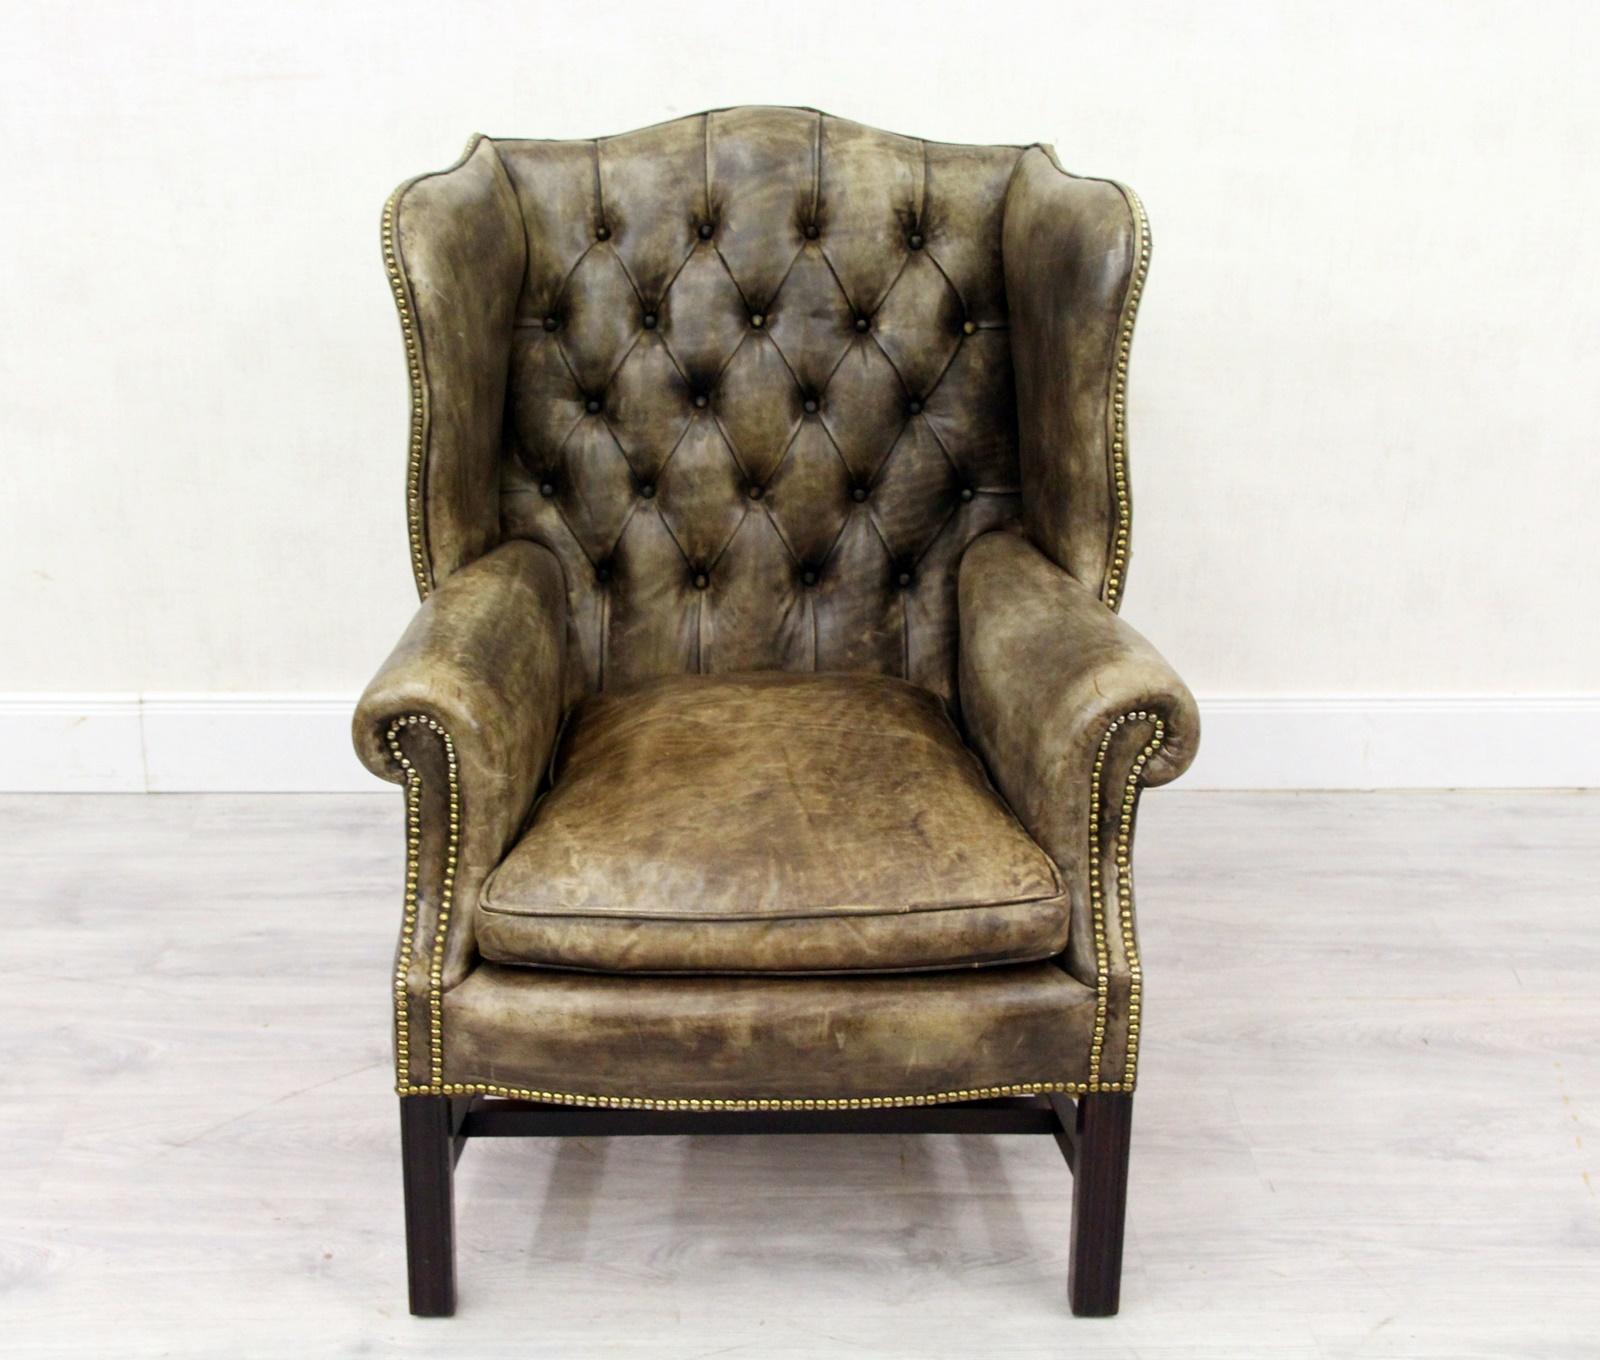 2 Chesterfield armchair ANTIK
The shape is Classic (wing chair)
armchair
Measures: Height x 100 cm width x 75 cm depth x 80 cm
Color: Kaki/Gray
Pillows: Down Pillows
Condition: The armchairs are in a very good condition for the age and still